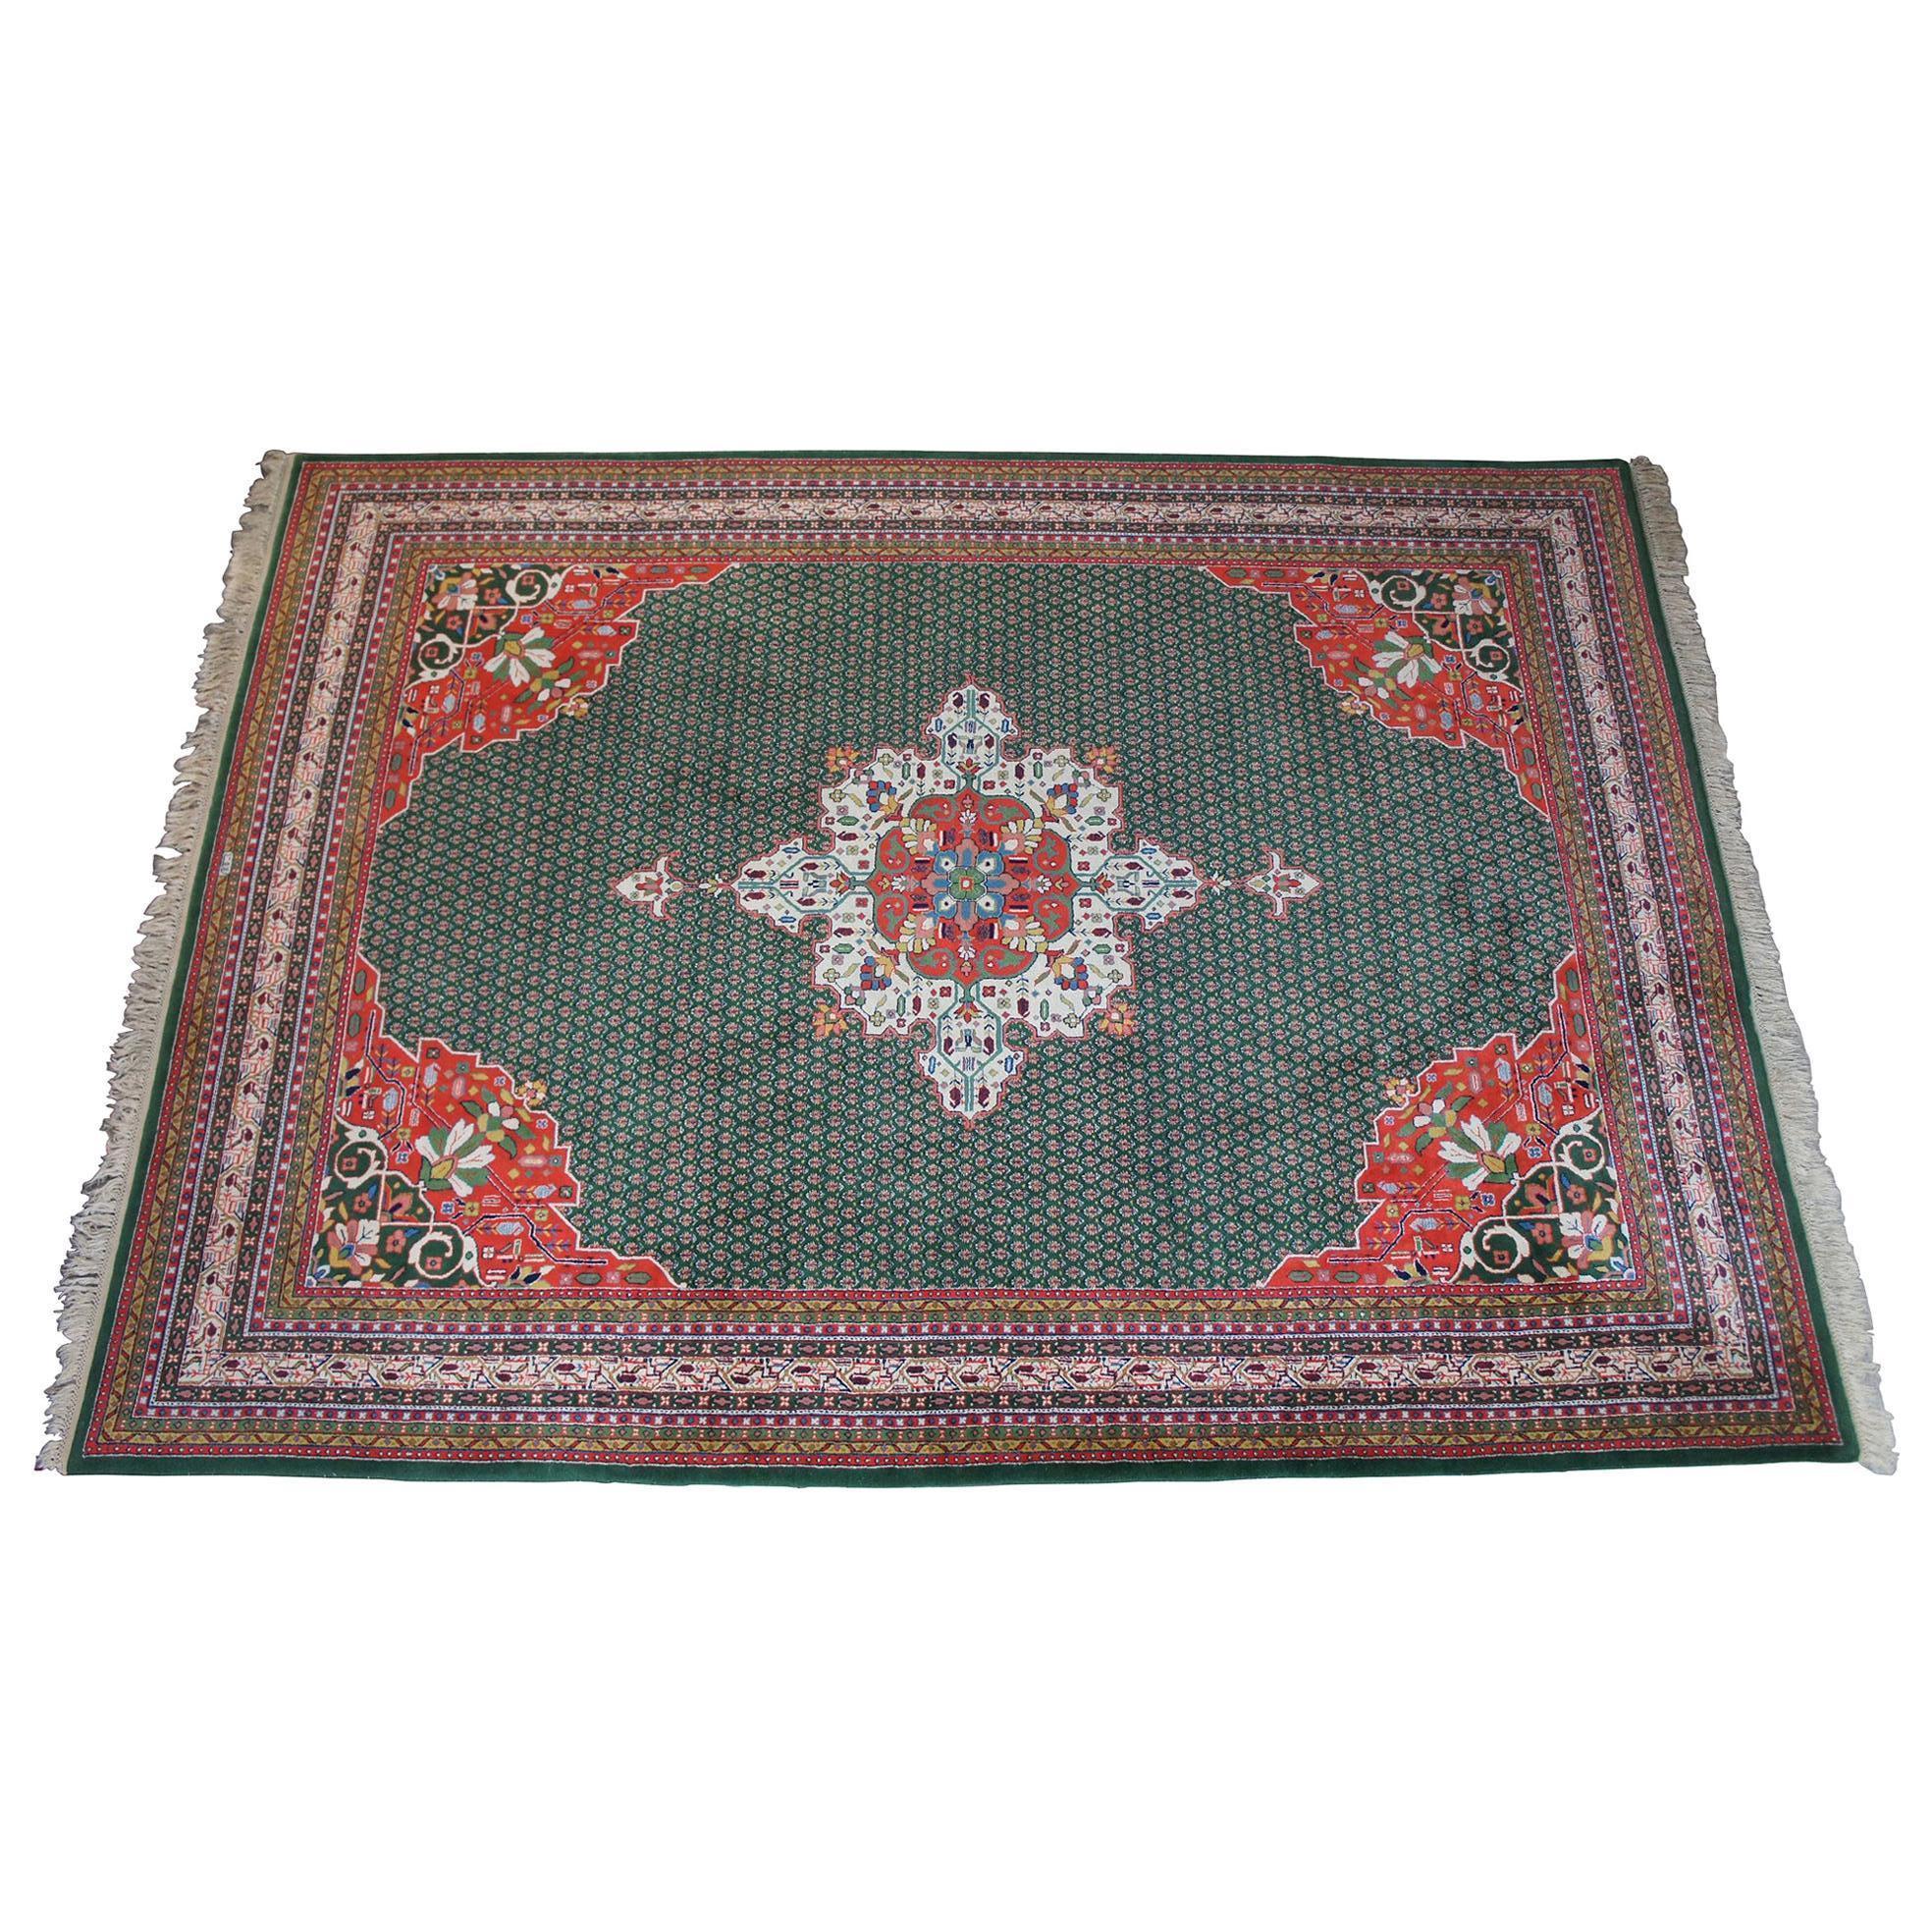 Vintage 100% virgin wool Kaimuri area rug, made in India. Tabriz design. The design Mahi refers to a well-known design of Persian rugs from the city and surrounding area of Tabriz in northwest Iran. The design is based on a famous Persian Garden